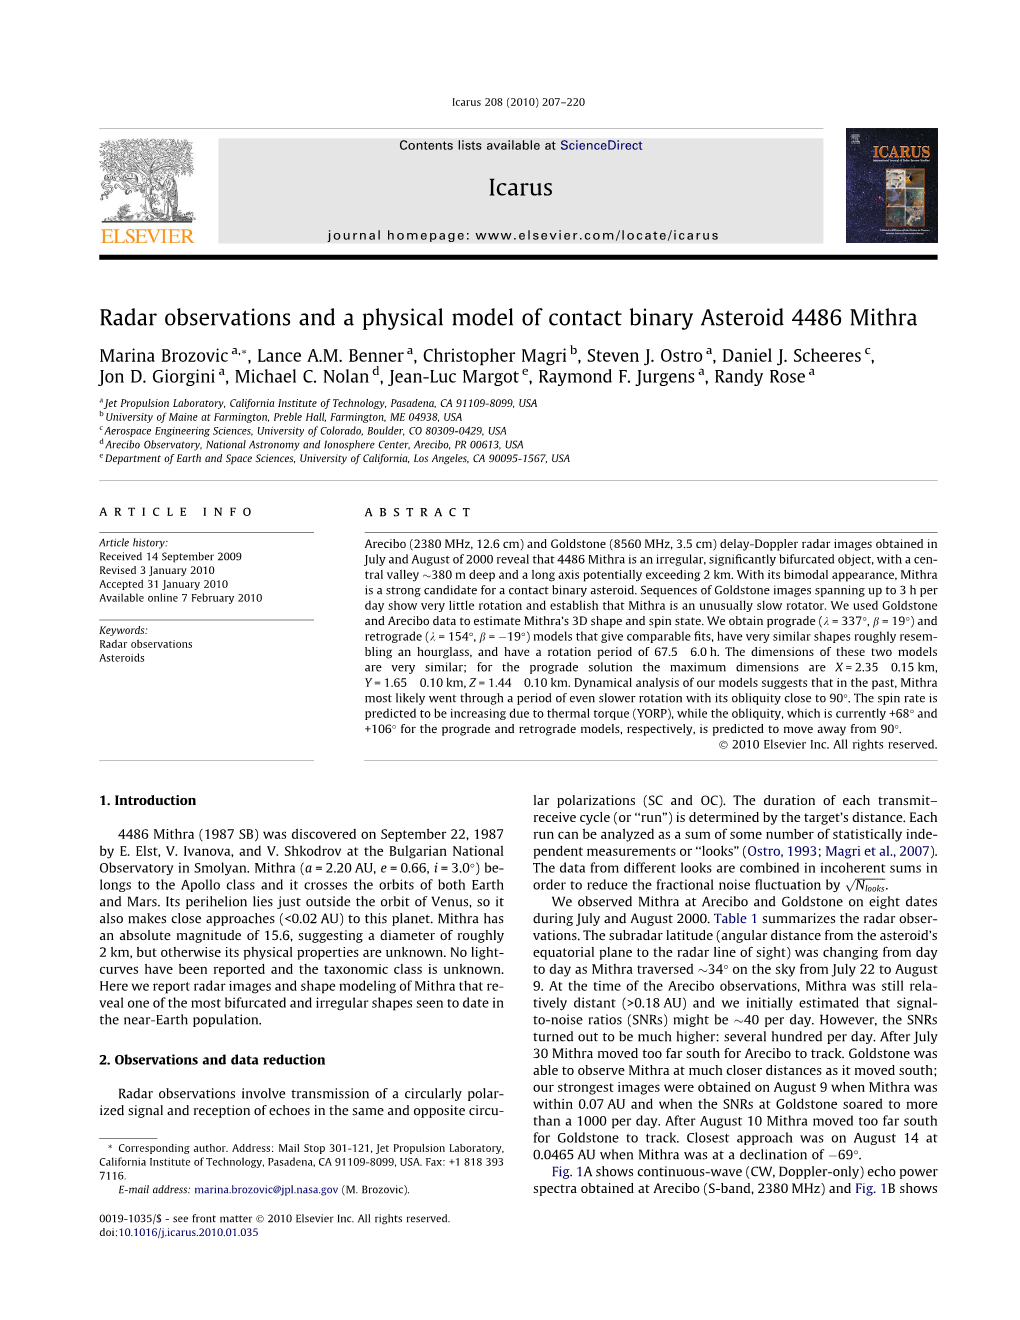 Radar Observations and a Physical Model of Contact Binary Asteroid 4486 Mithra